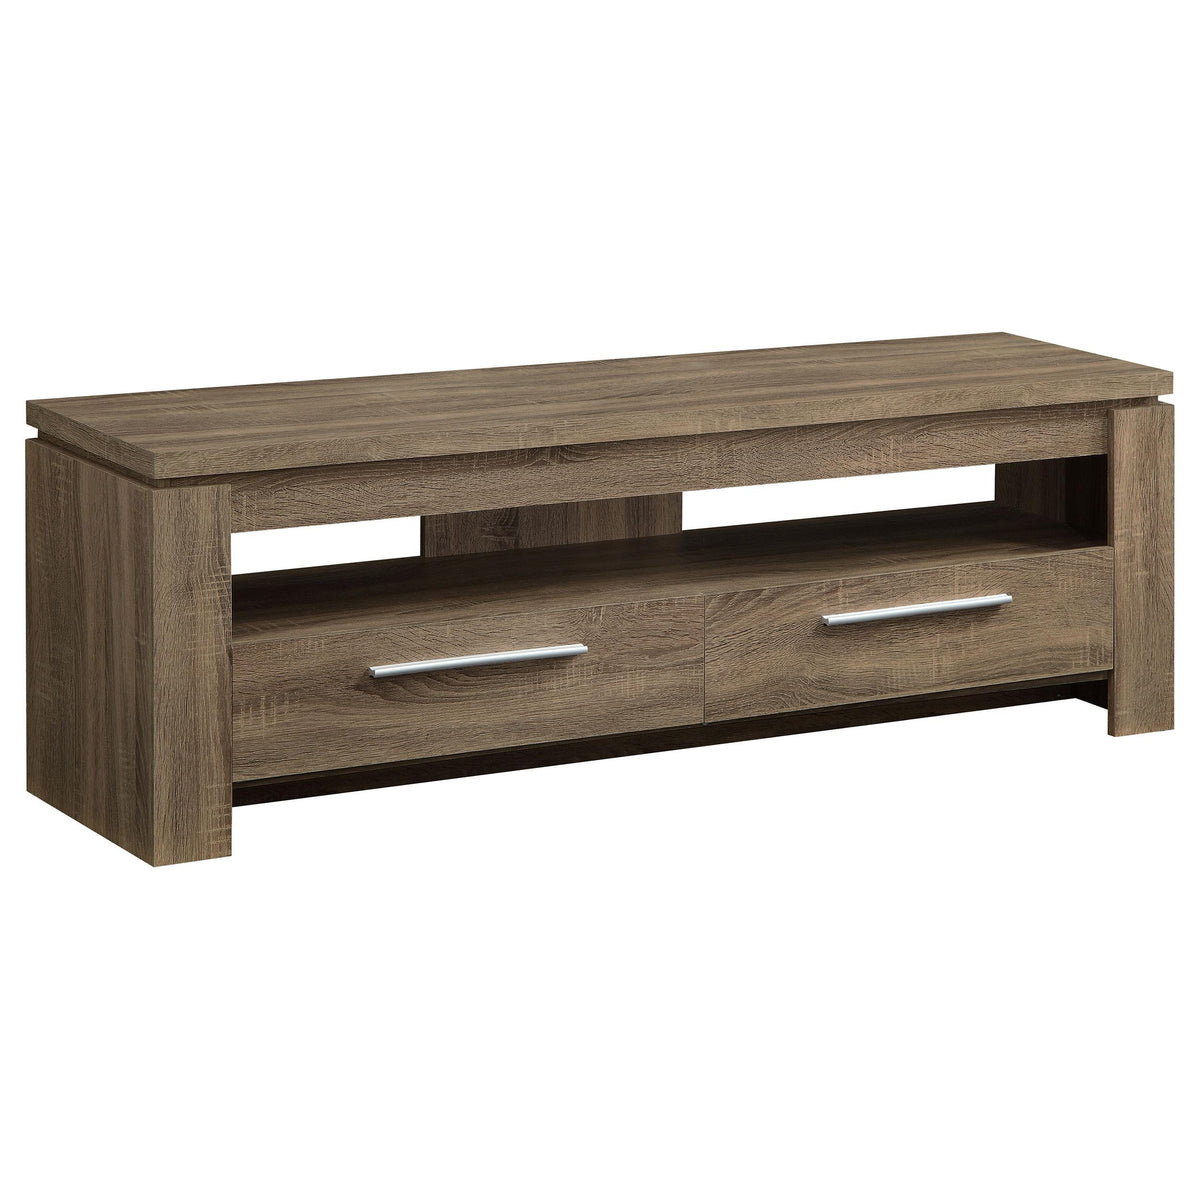 Elkton 2-drawer TV Console Weathered Brown Elkton 2-drawer TV Console Weathered Brown Half Price Furniture